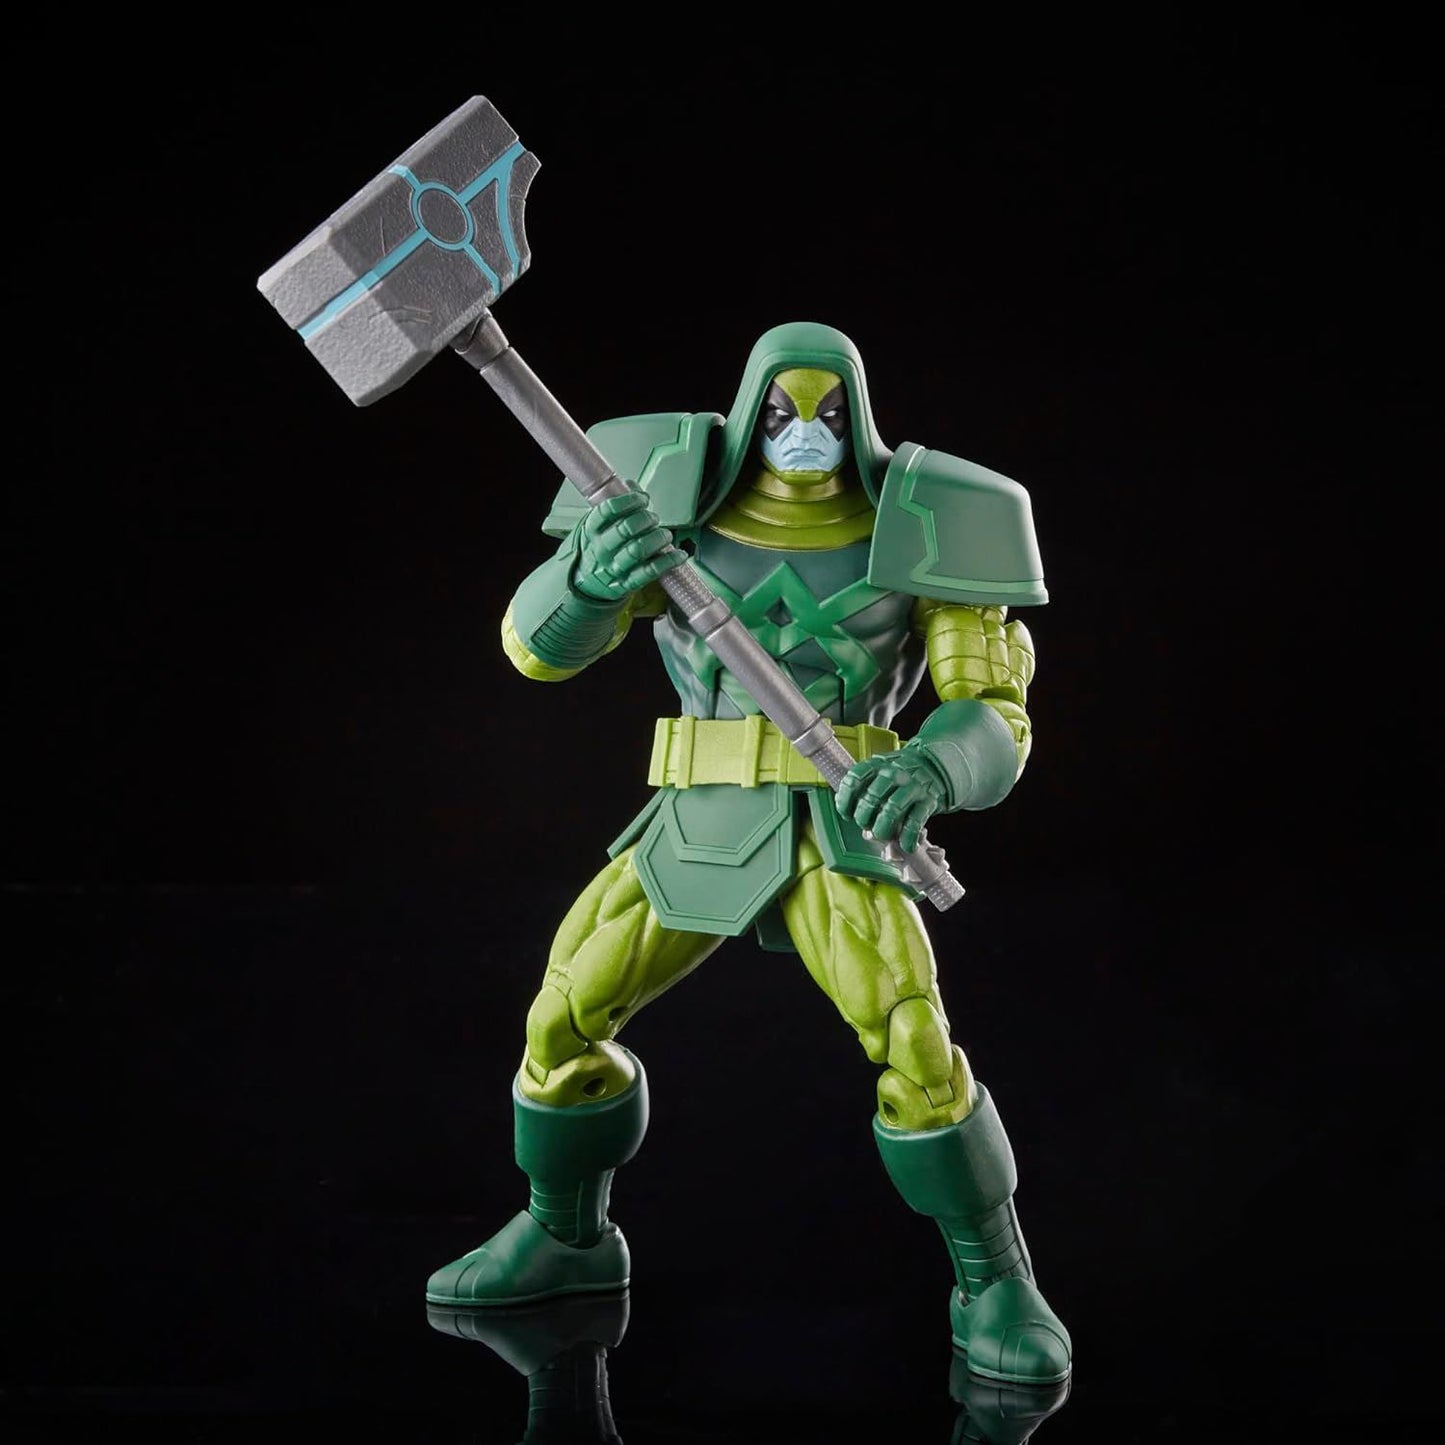 Ronan The Accuser Action Figure F6486 Marvel Legends Guardians of the Galaxy